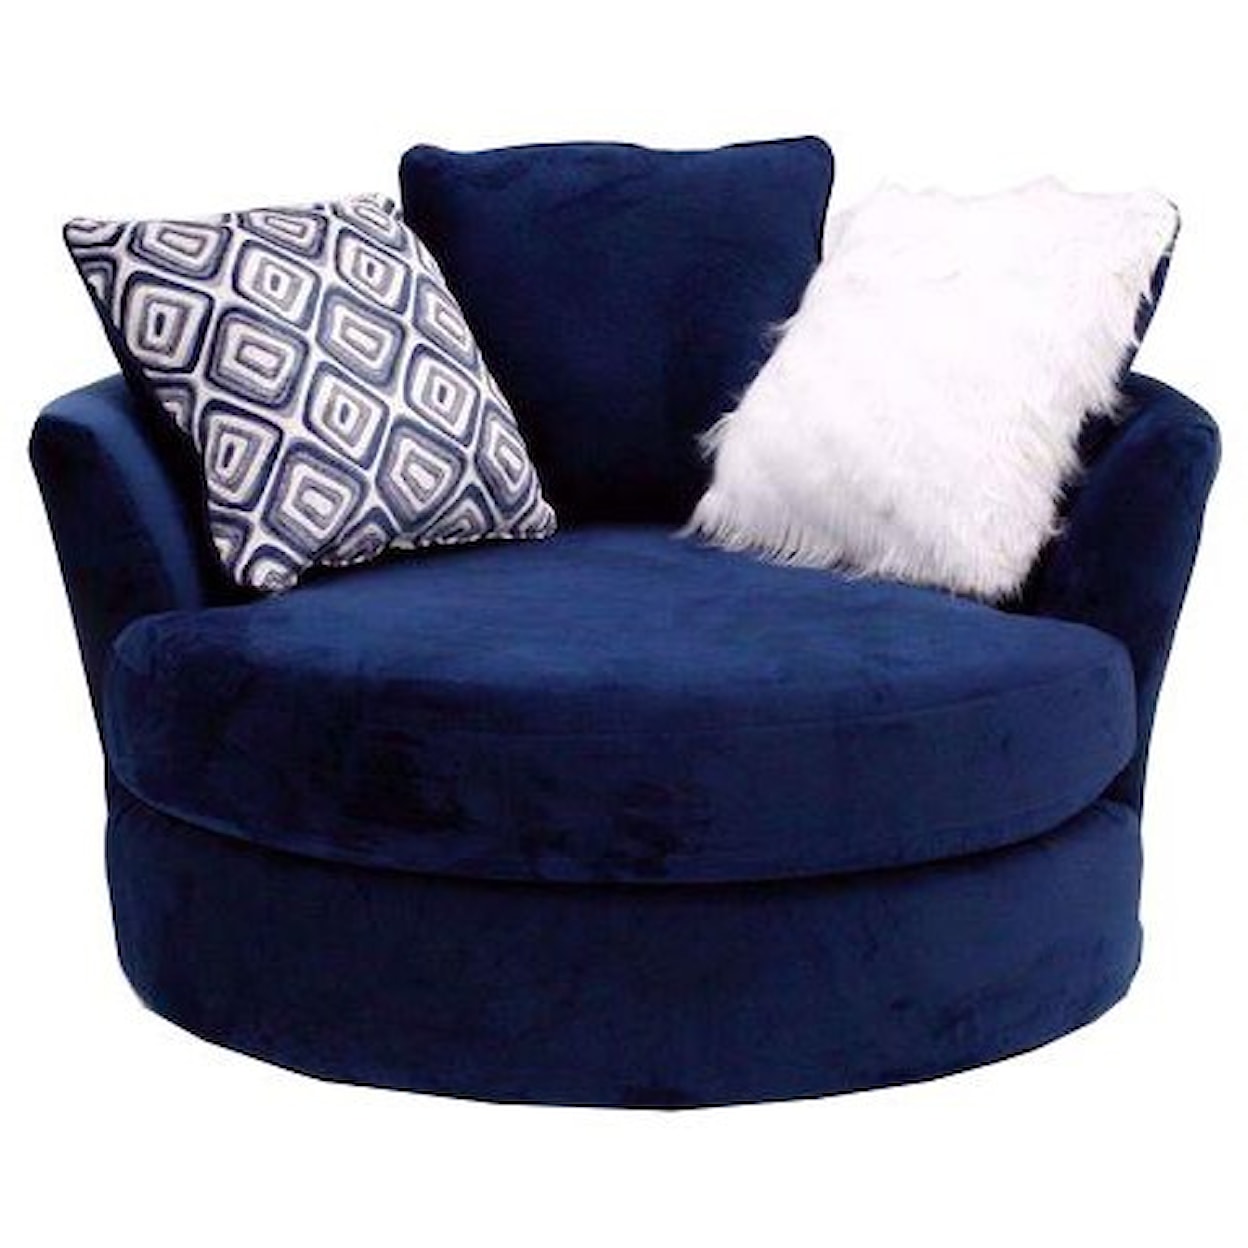 Albany Groovy Navy Upholstered Chairs